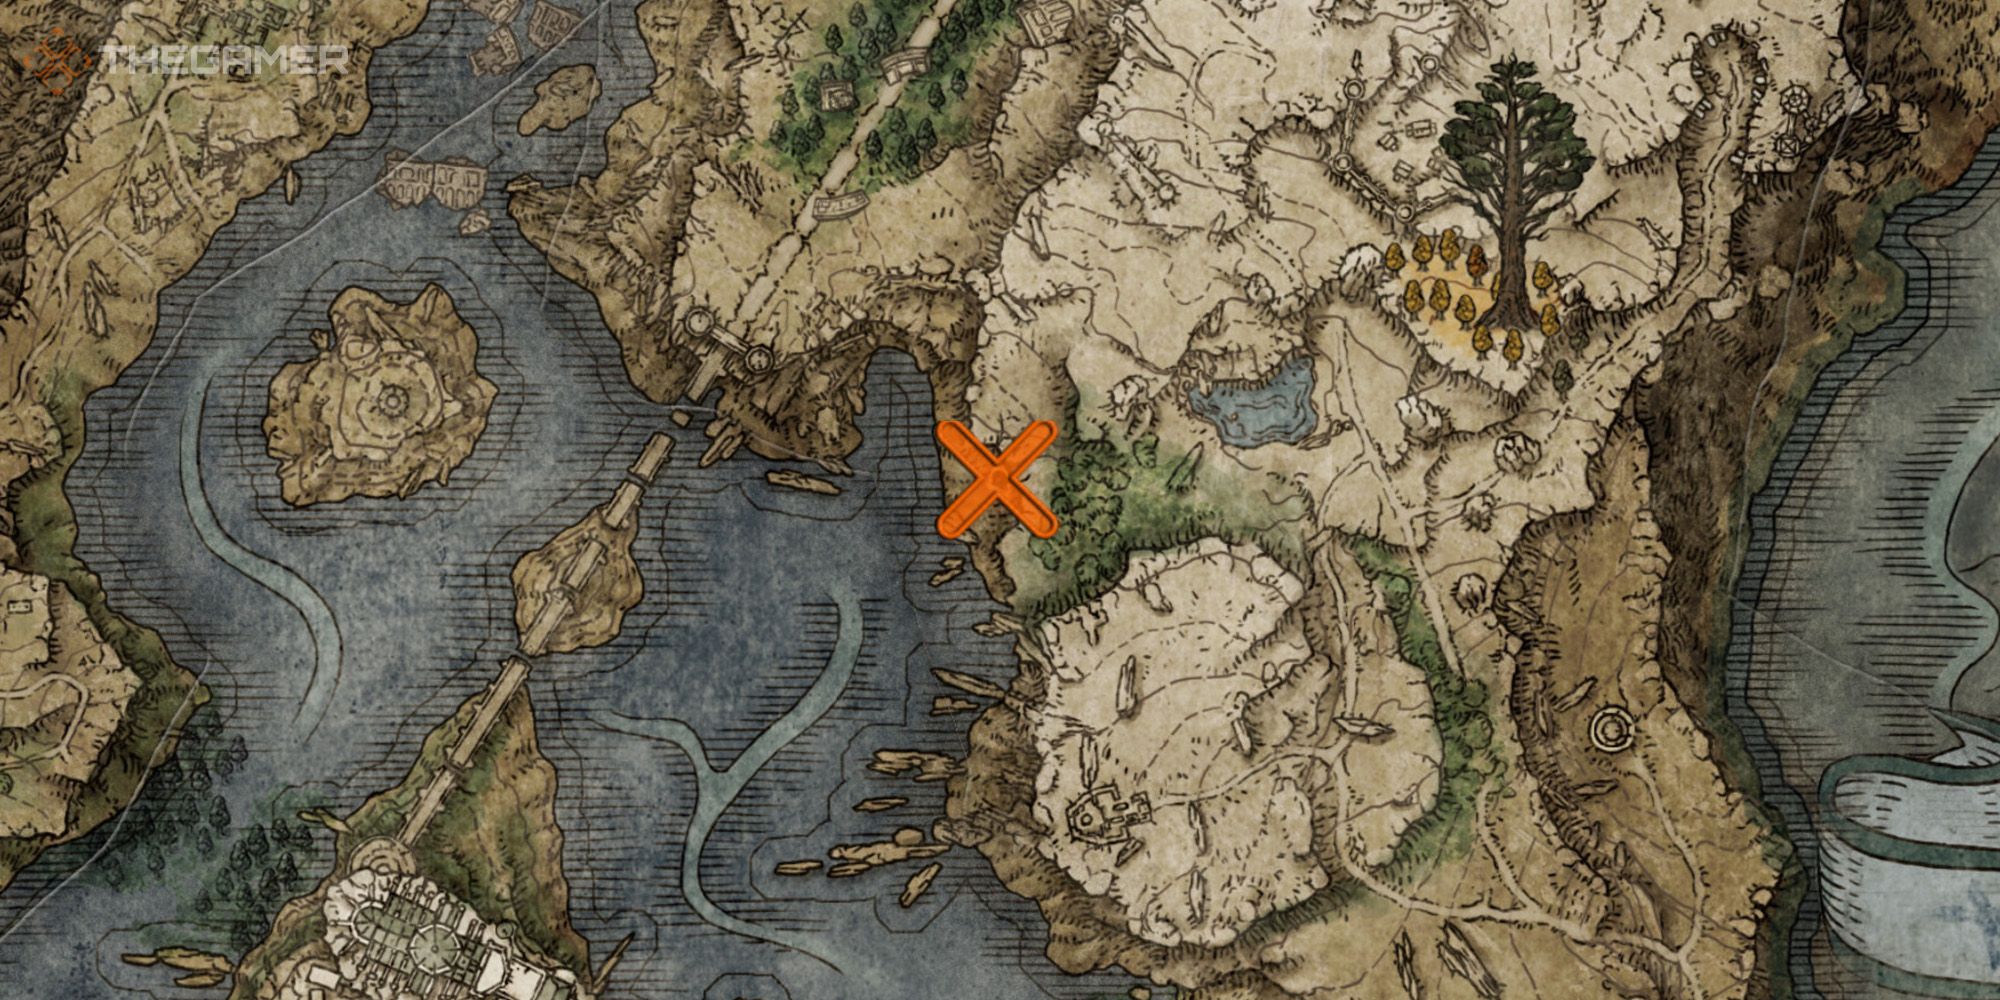 Where To Find Every Sorcery Spell In Elden Ring